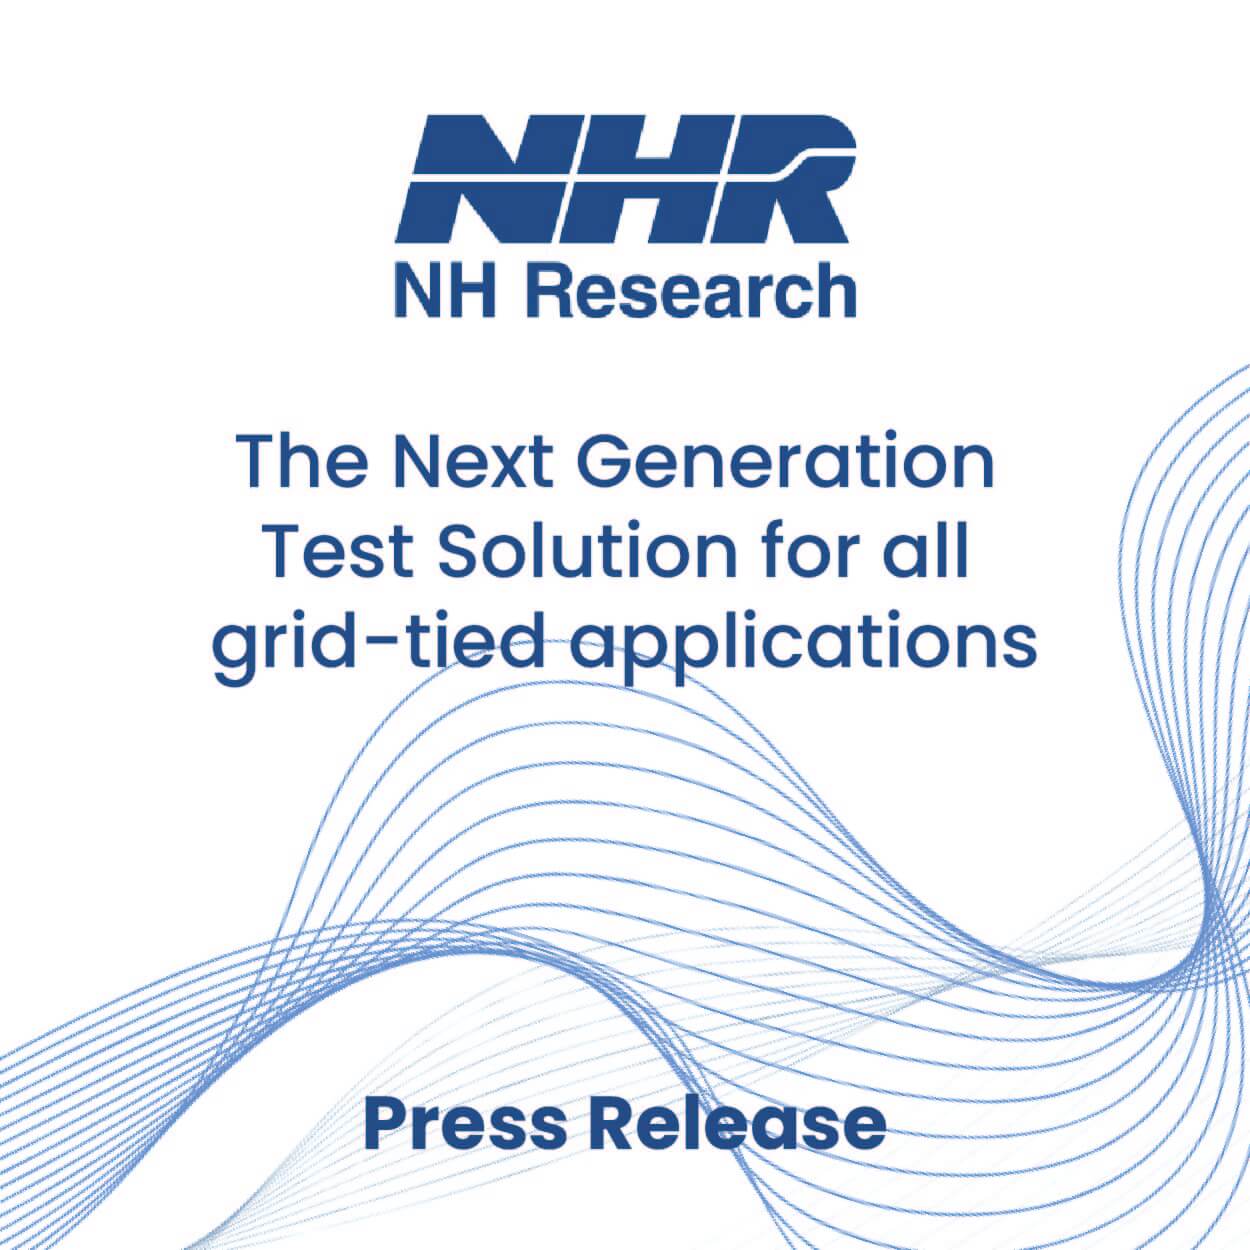 NH Research Launches Next Generation Regenerative Grid Simulator for Testing High Power Grid-Tied Applications